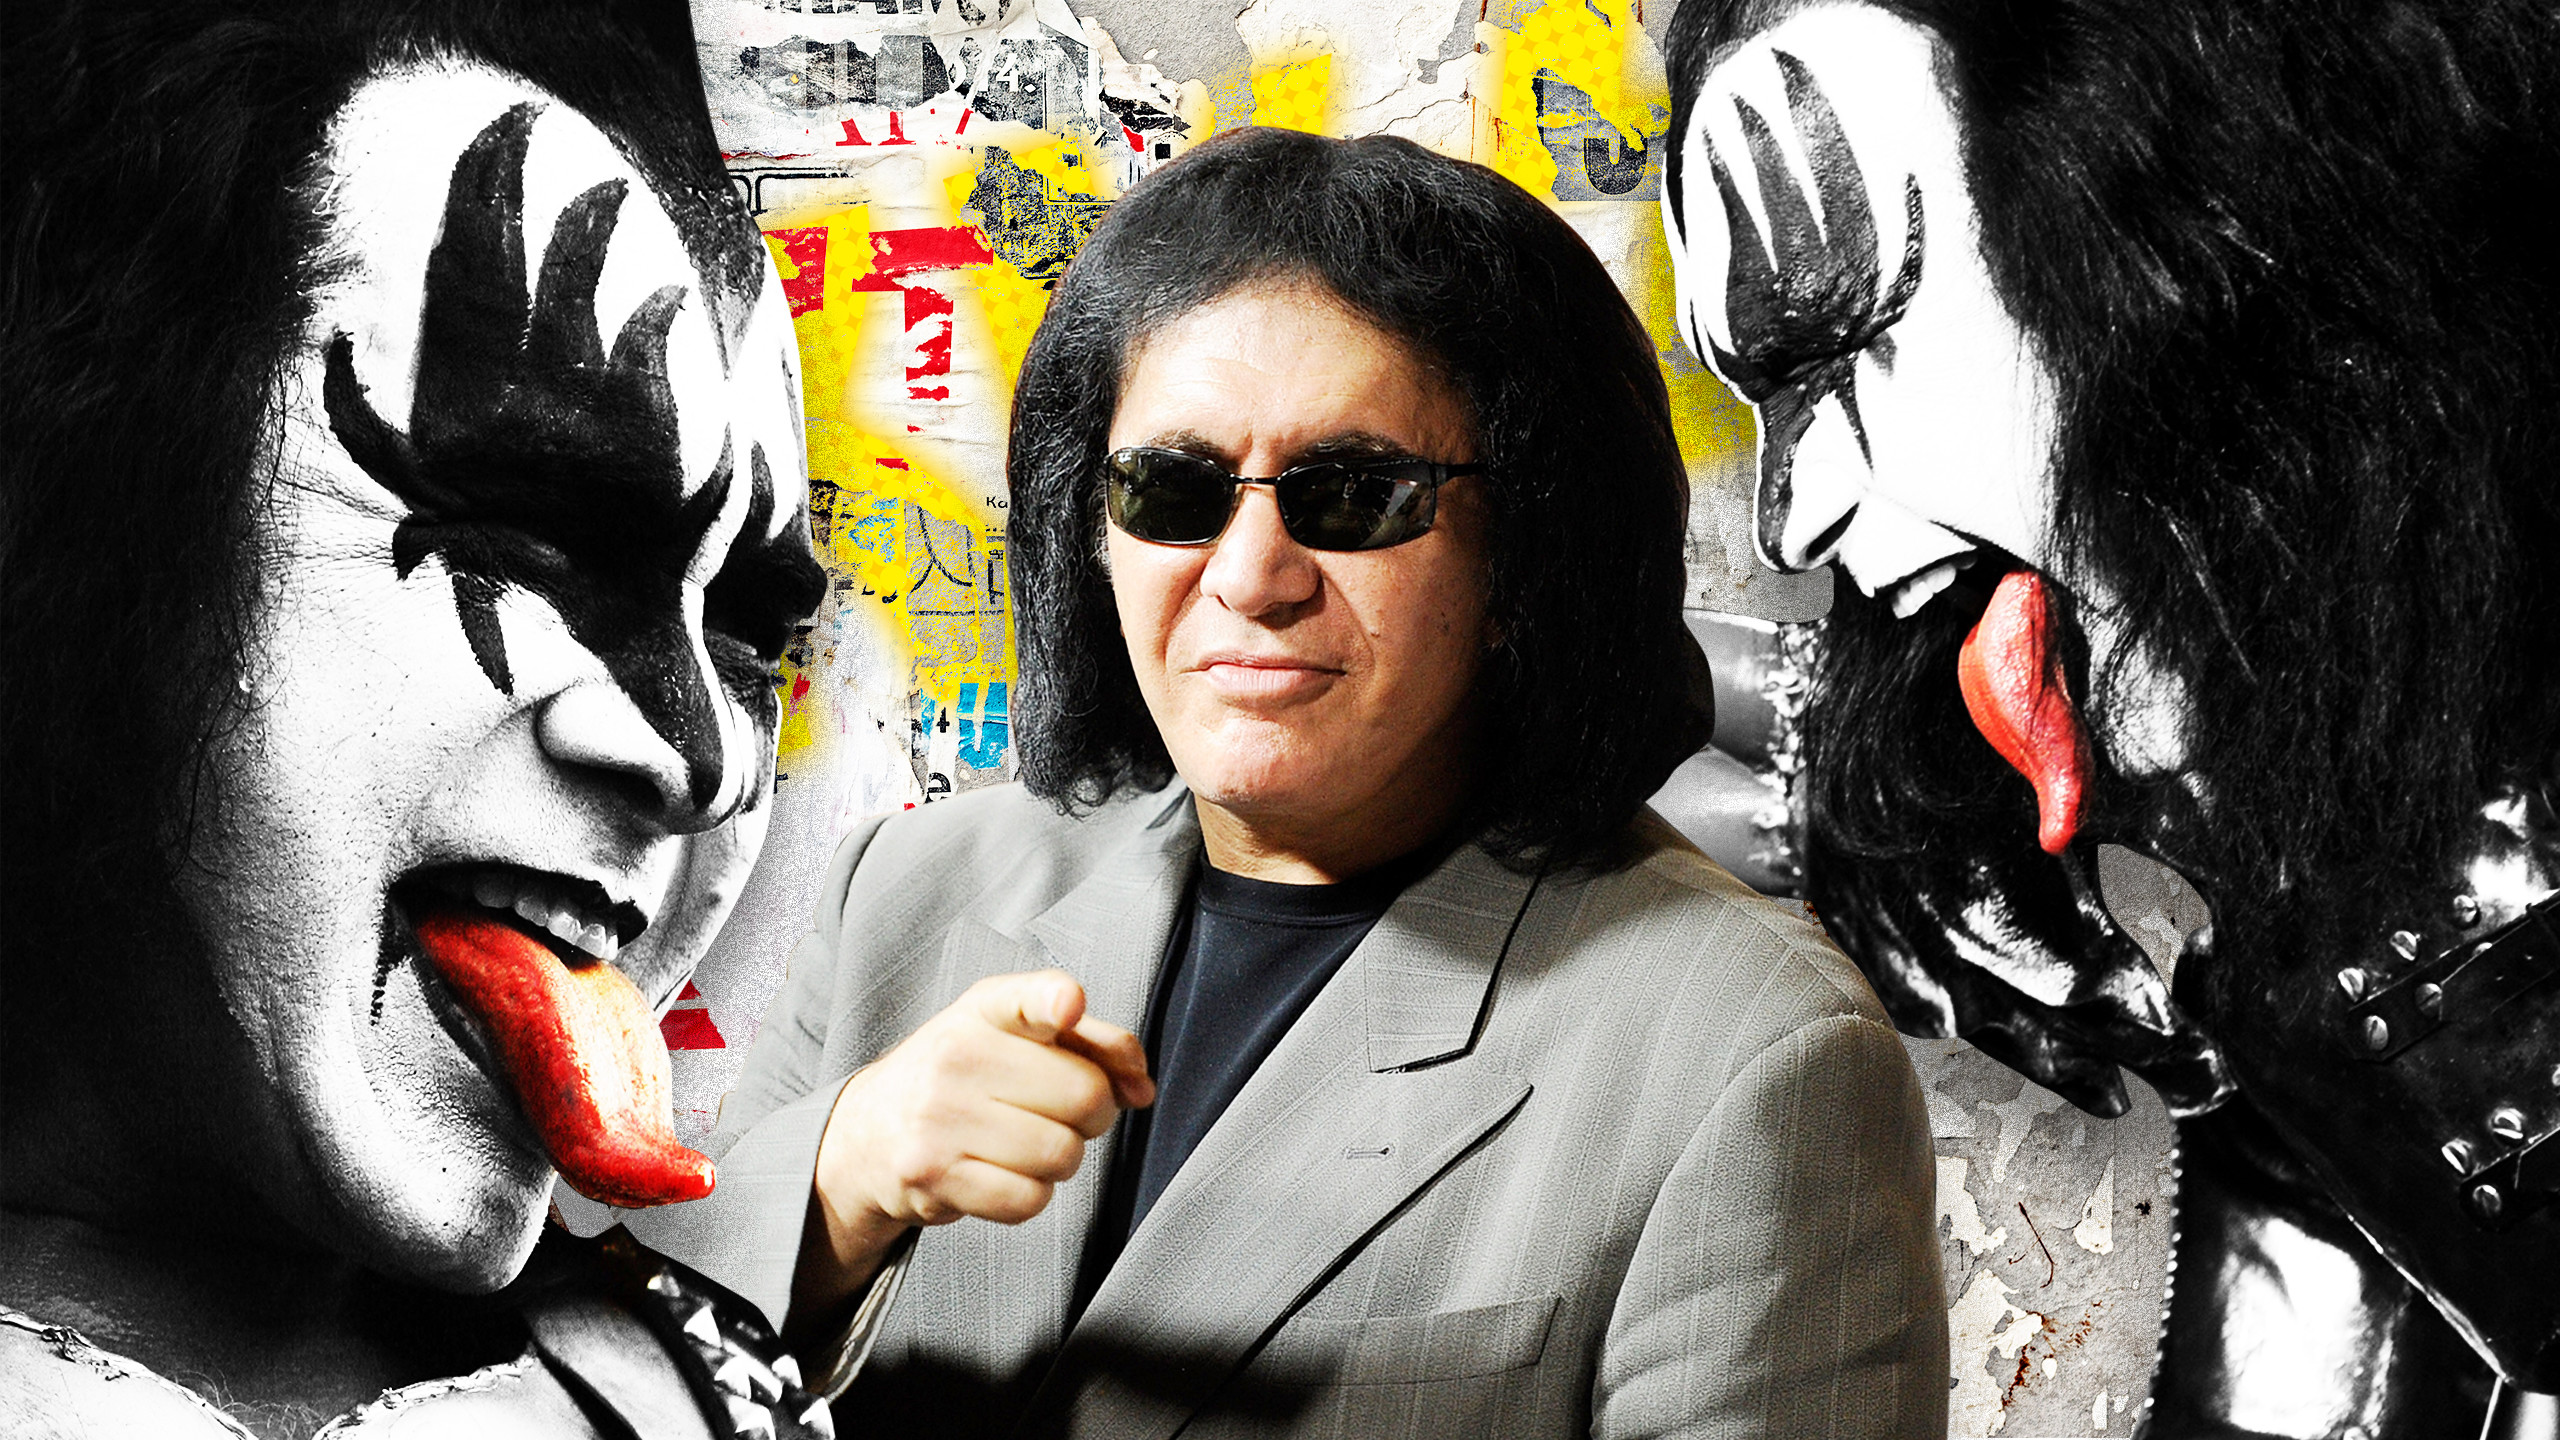 2560x1440 Gene Simmons on Turning Down Trump's Inauguration: 'In This Polarizing Era,  It's Not a Good Idea'